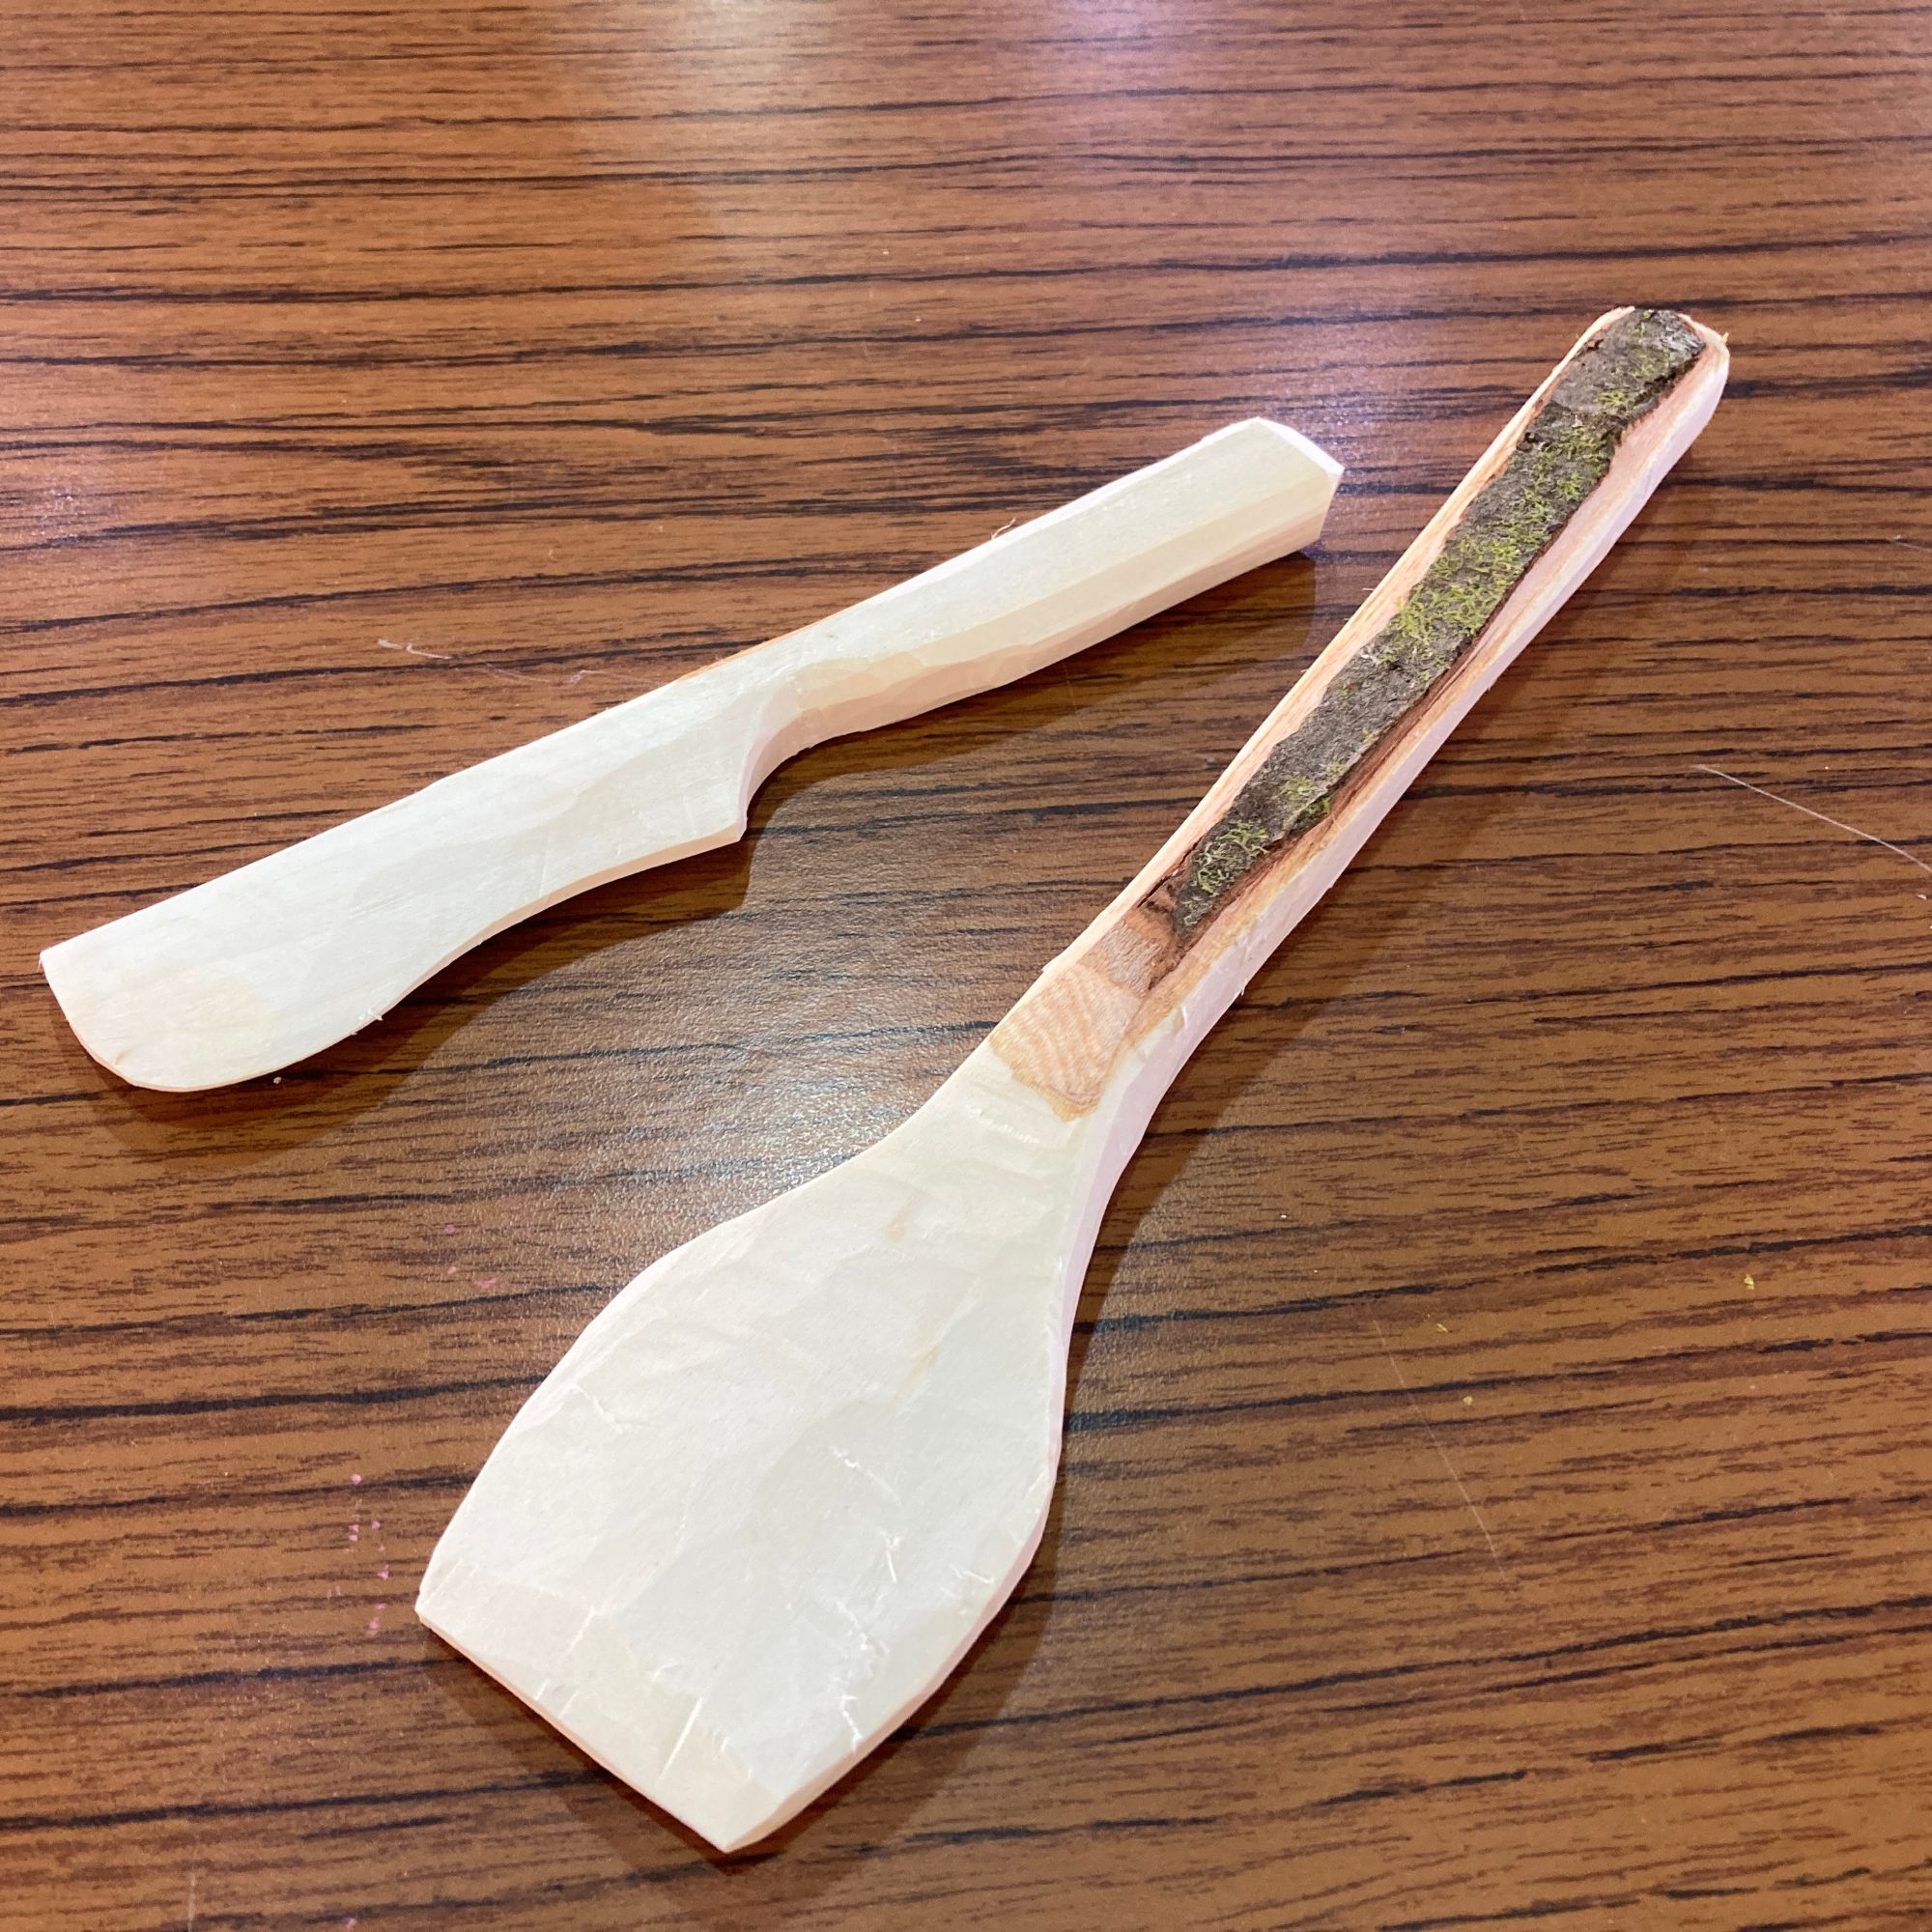 Spatula and Butter Spreader Carving Workshop - Results